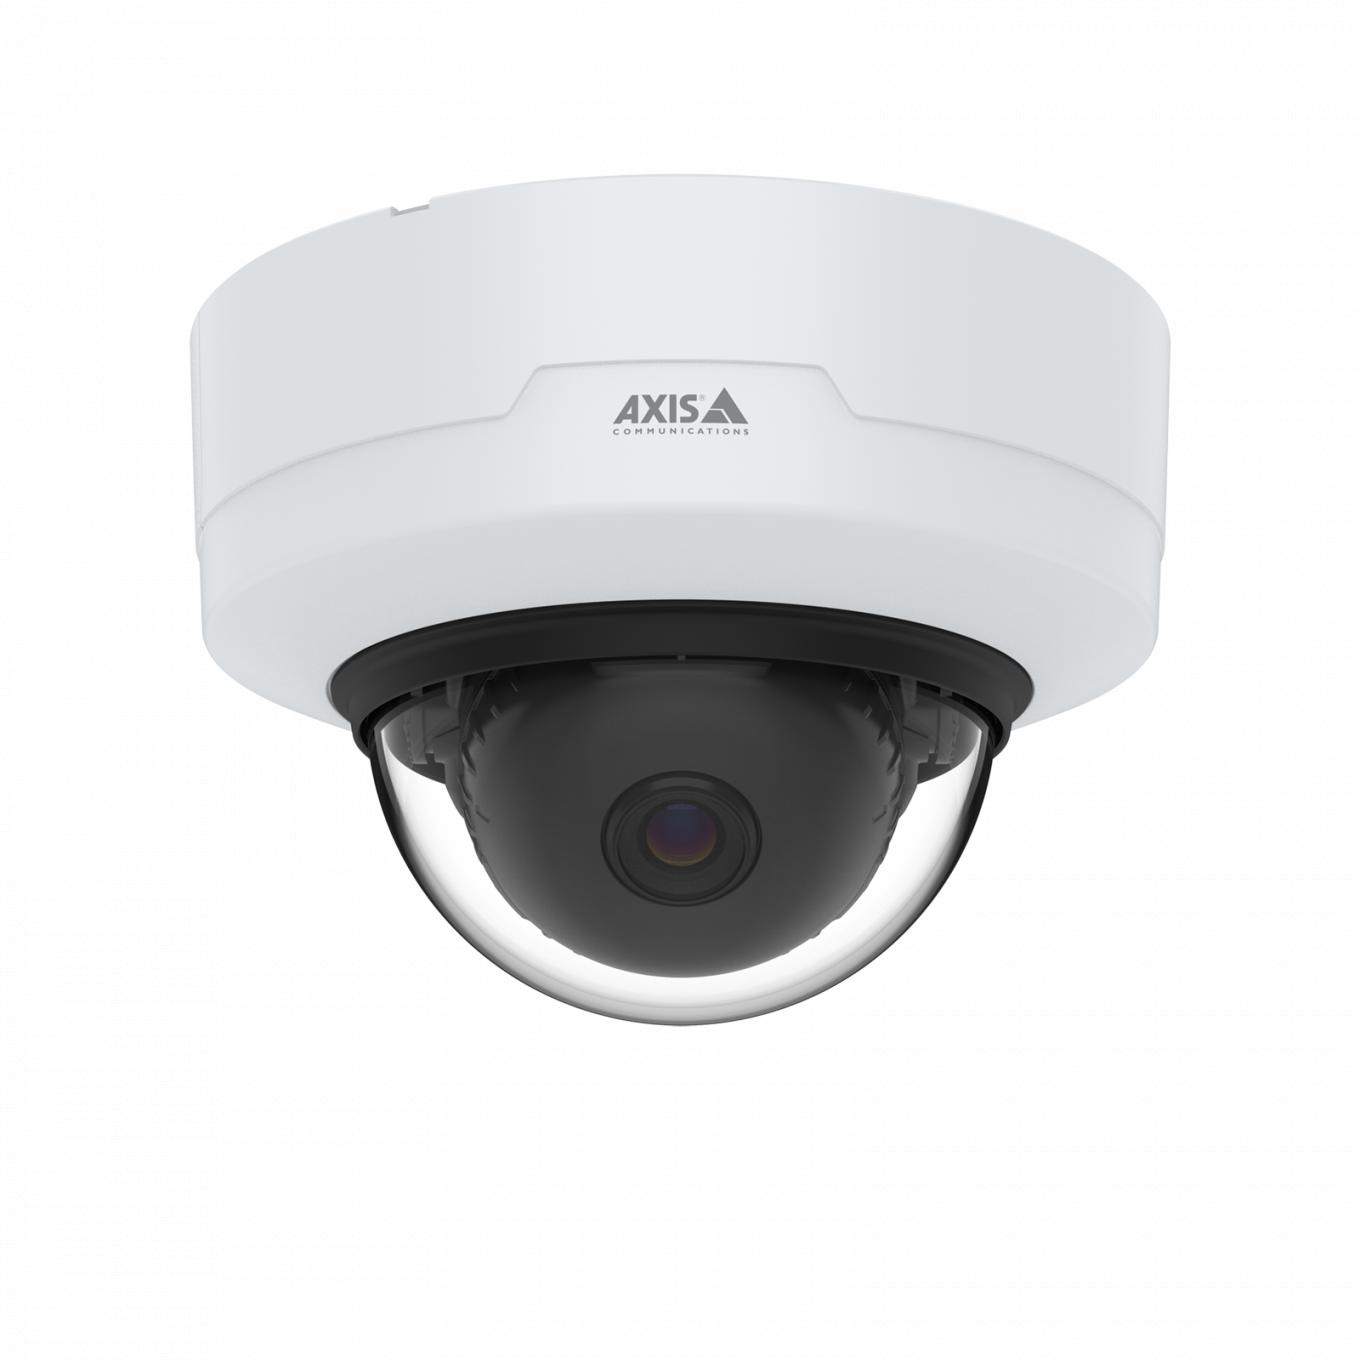 AXIS P3265-V Dome camera mounted in ceiling from right